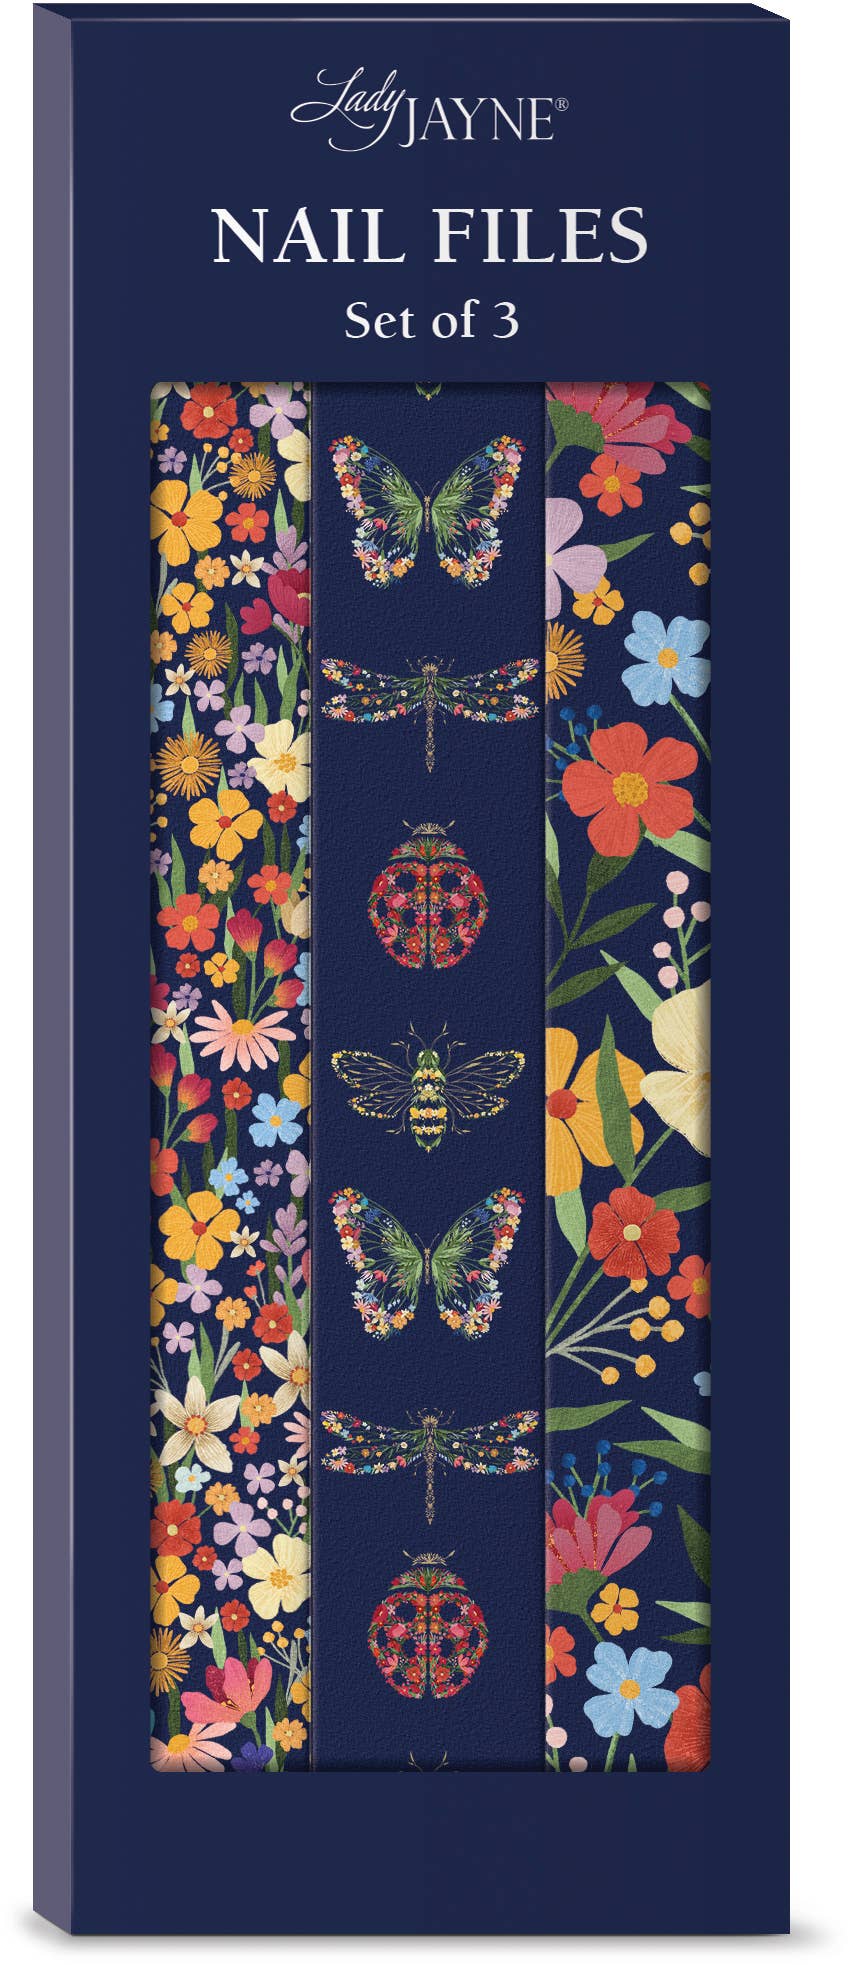 Lady Jayne - Nail file set of 3 - Insects